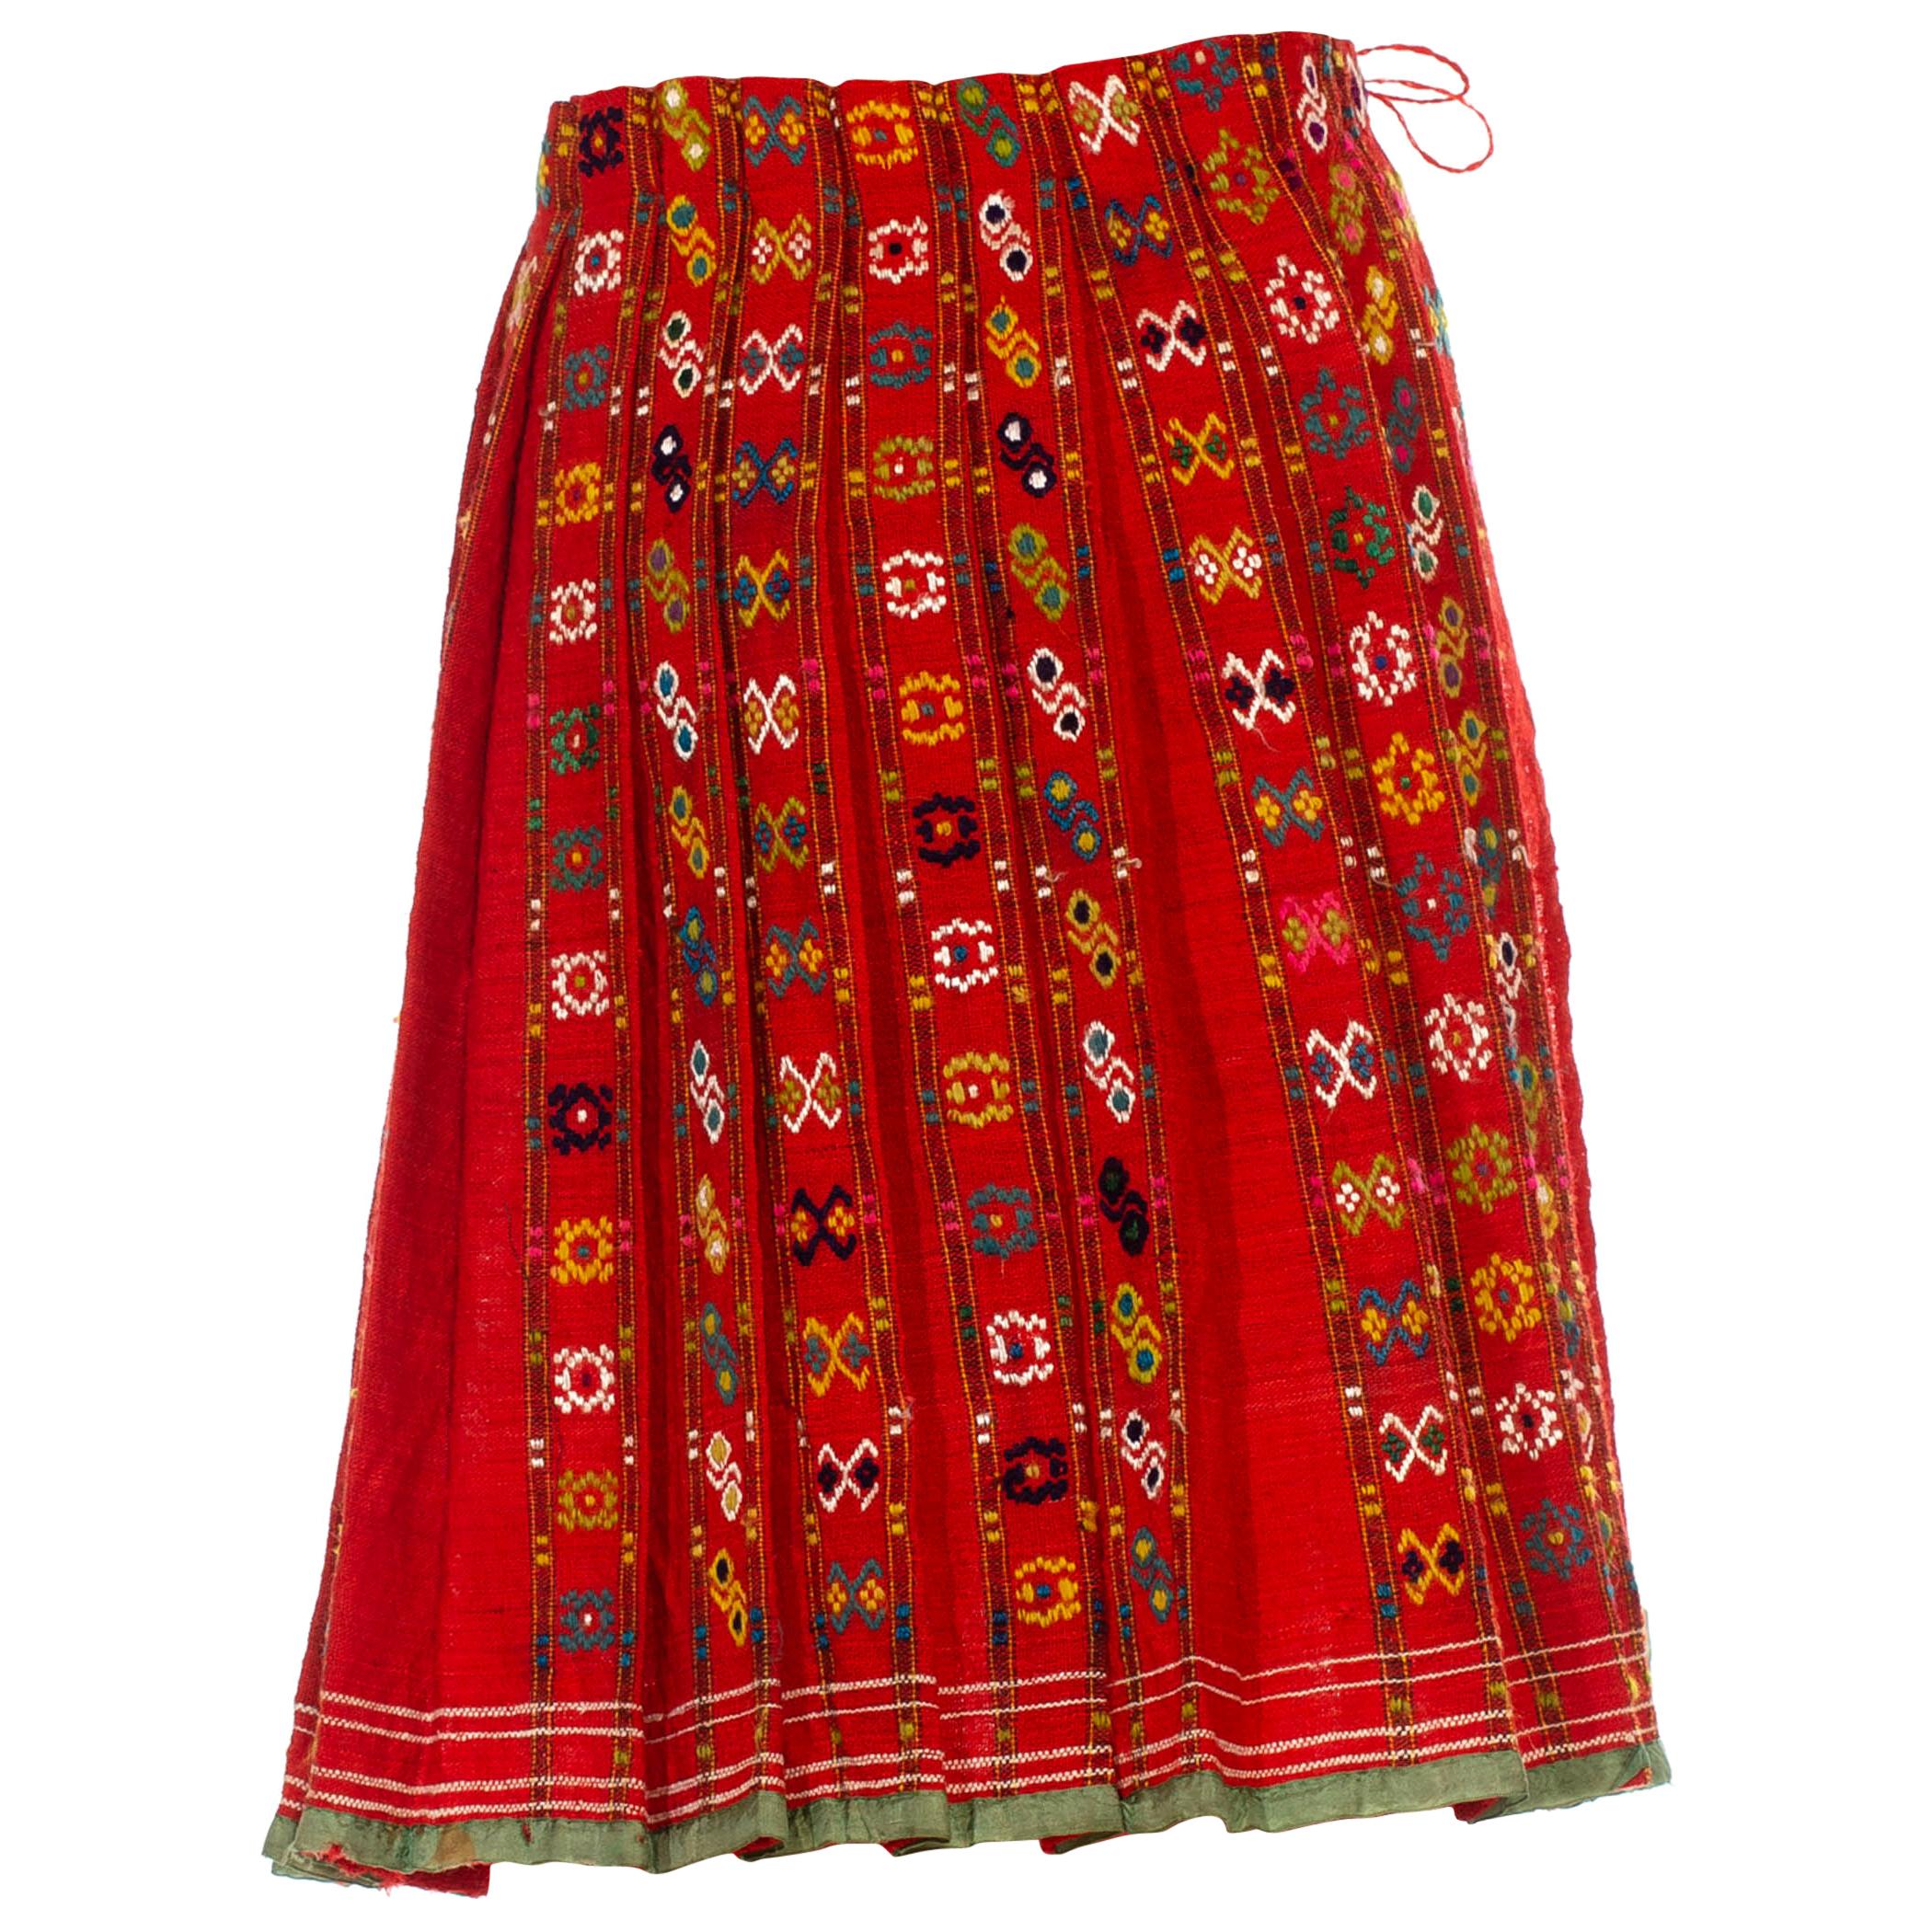 Victorian Red Hand Embroidered Wool Pleated Hungarian Folk Wrap Skirt